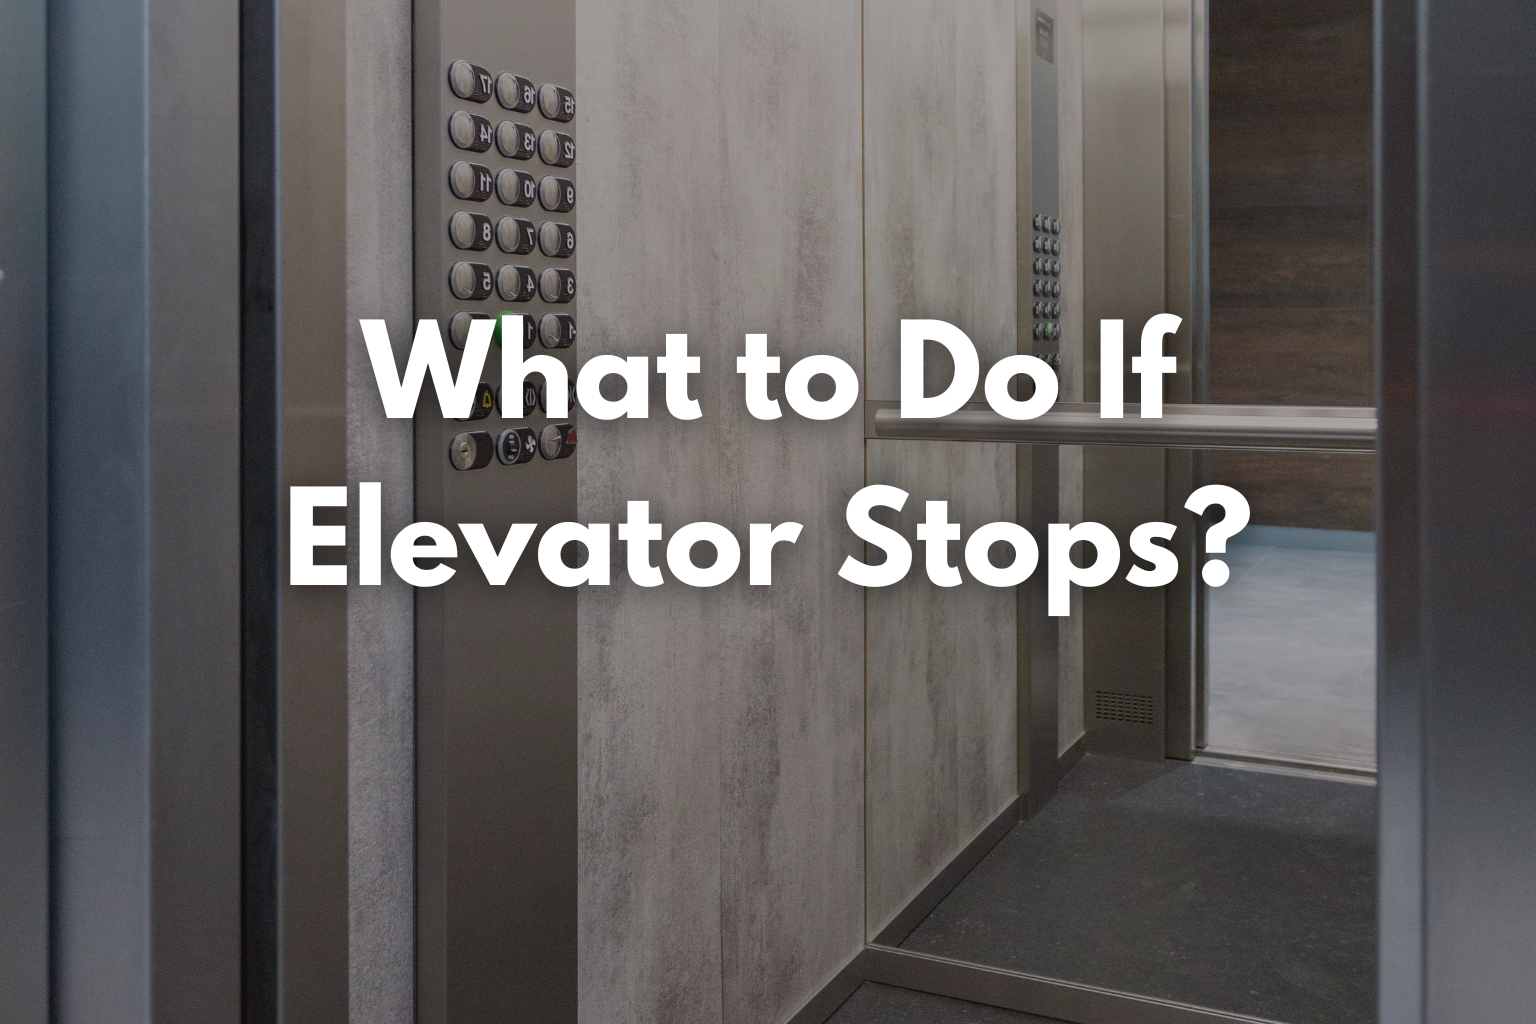 What to Do If Elevator Stops?